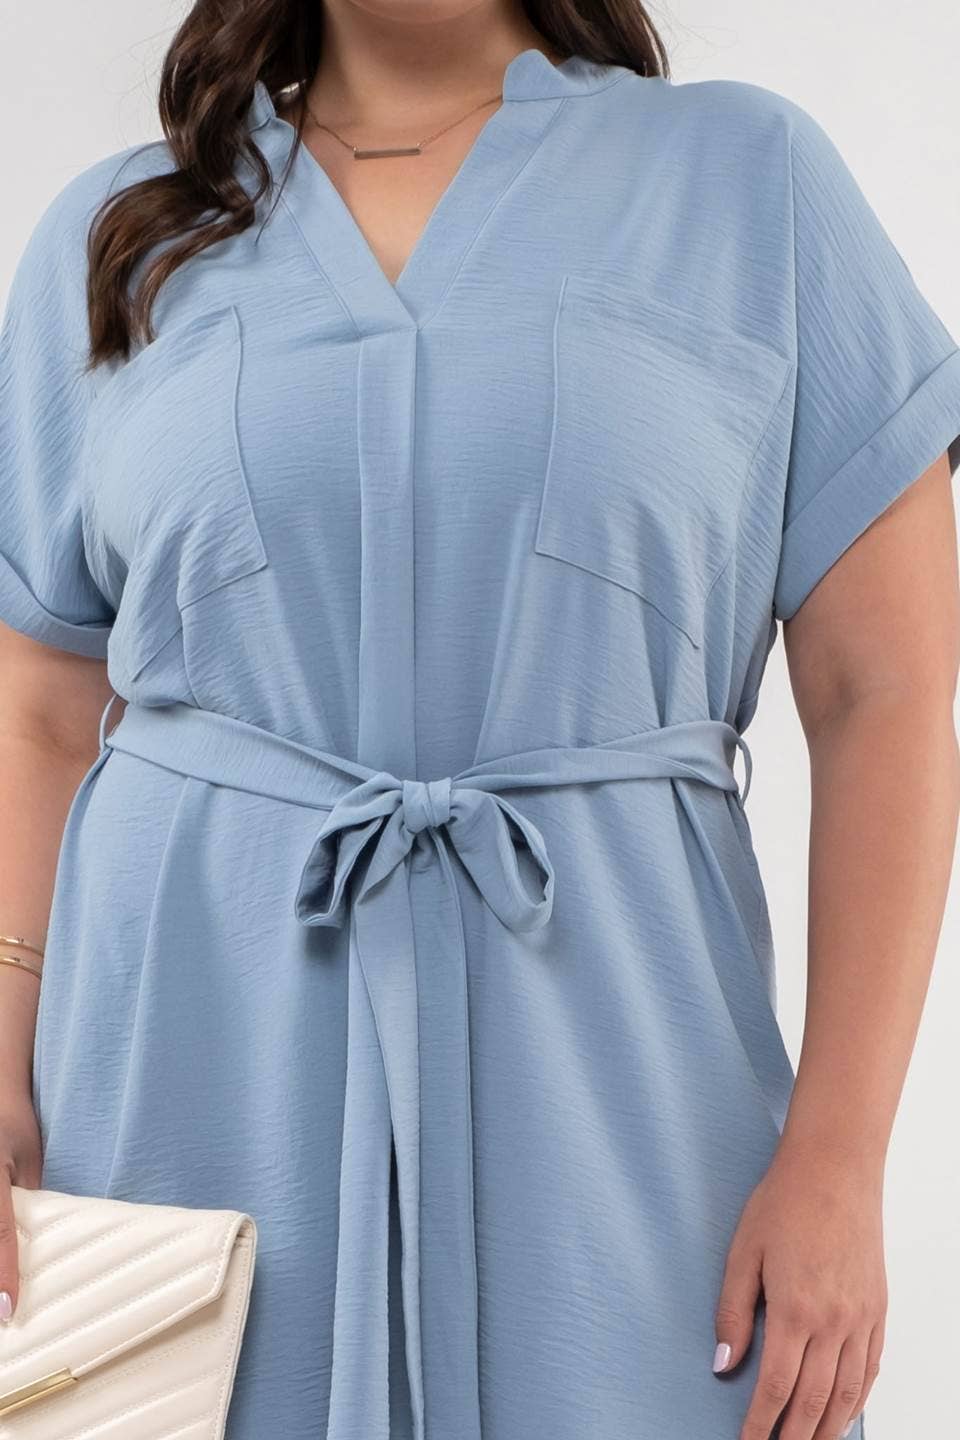 Curvy Bethany Back Buttoned Belted Mini Dress